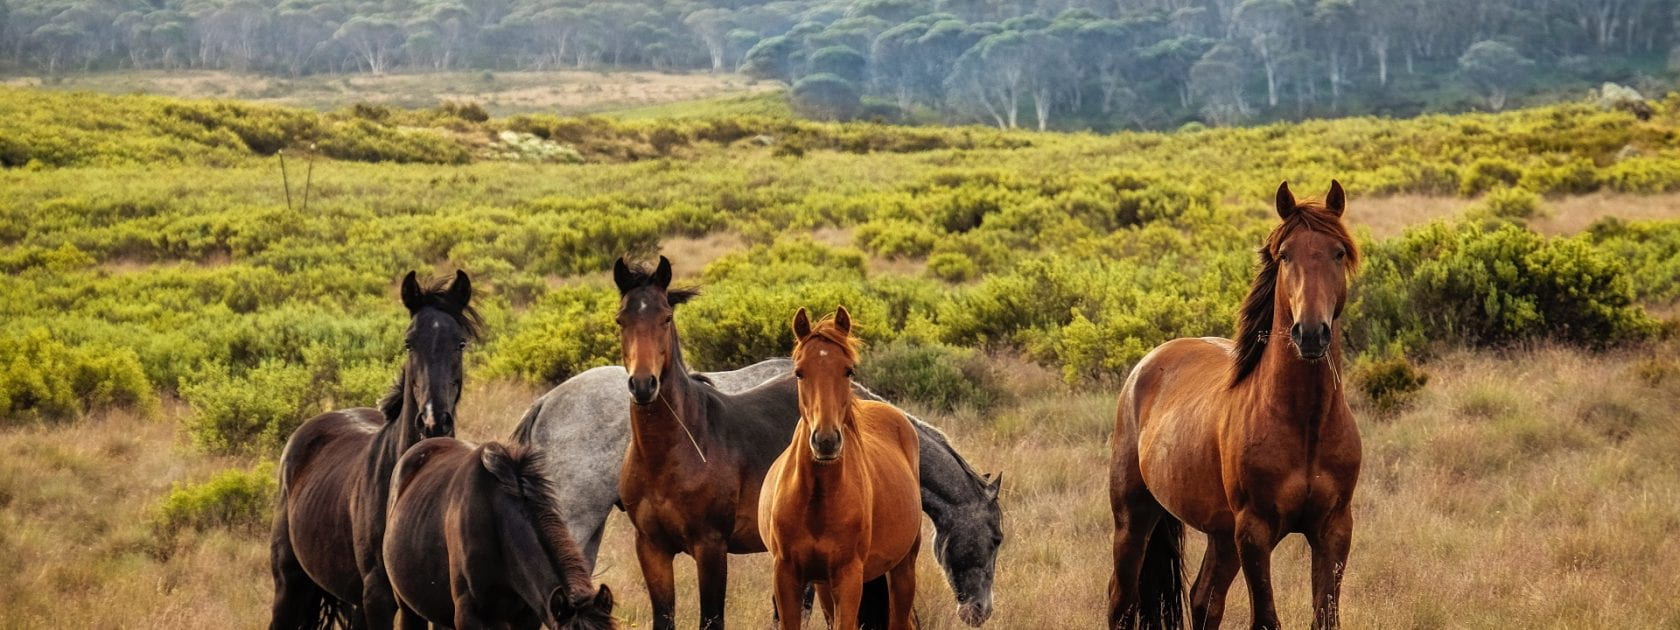 Six horses are standing in a field looking ahead towards the camera.